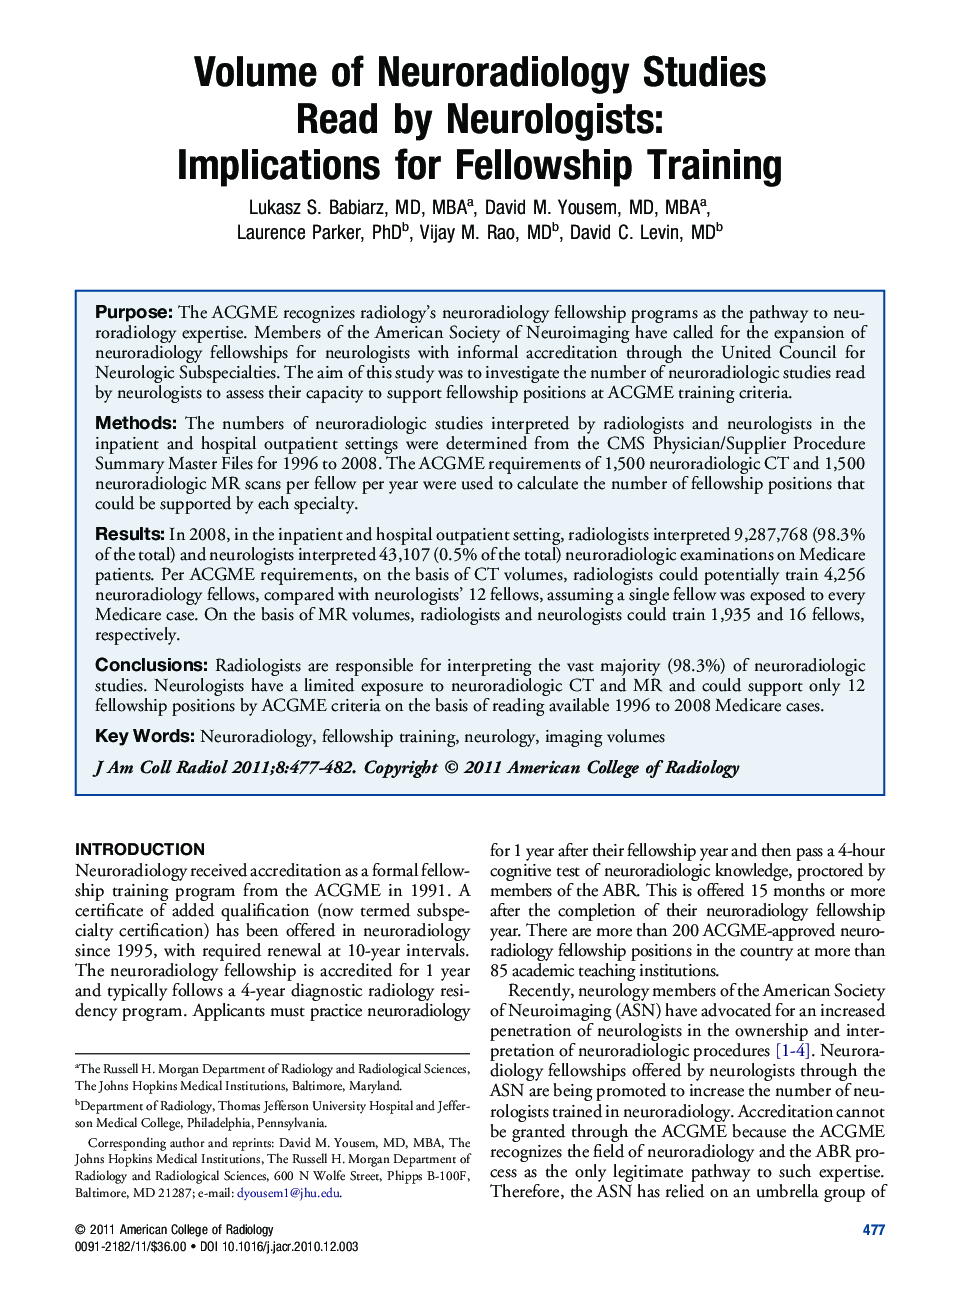 Volume of Neuroradiology Studies Read by Neurologists: Implications for Fellowship Training